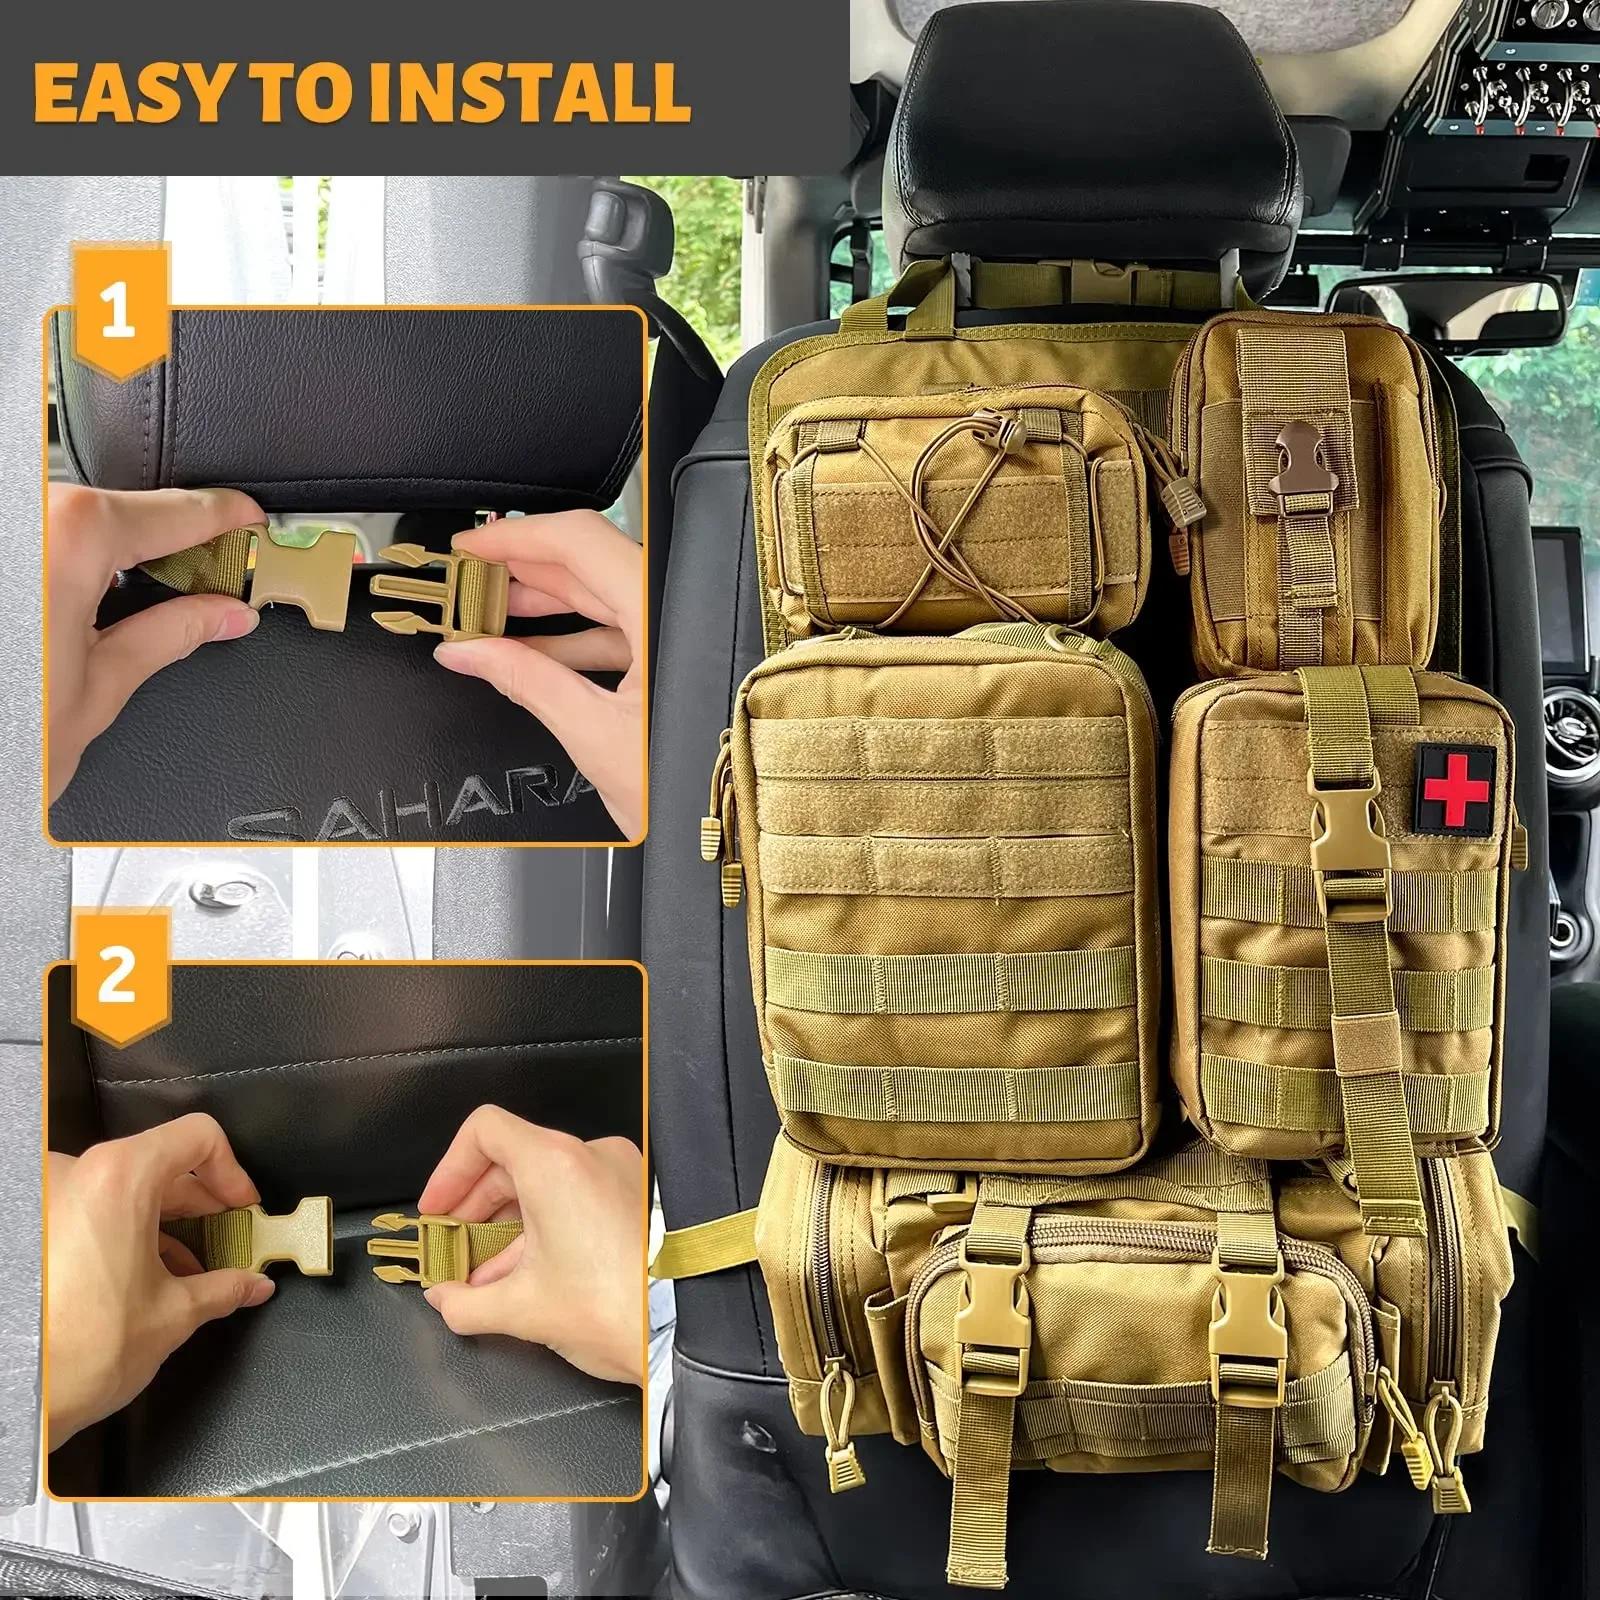   г   , Molle  ¼  ,  ¼  , 5 Molle 